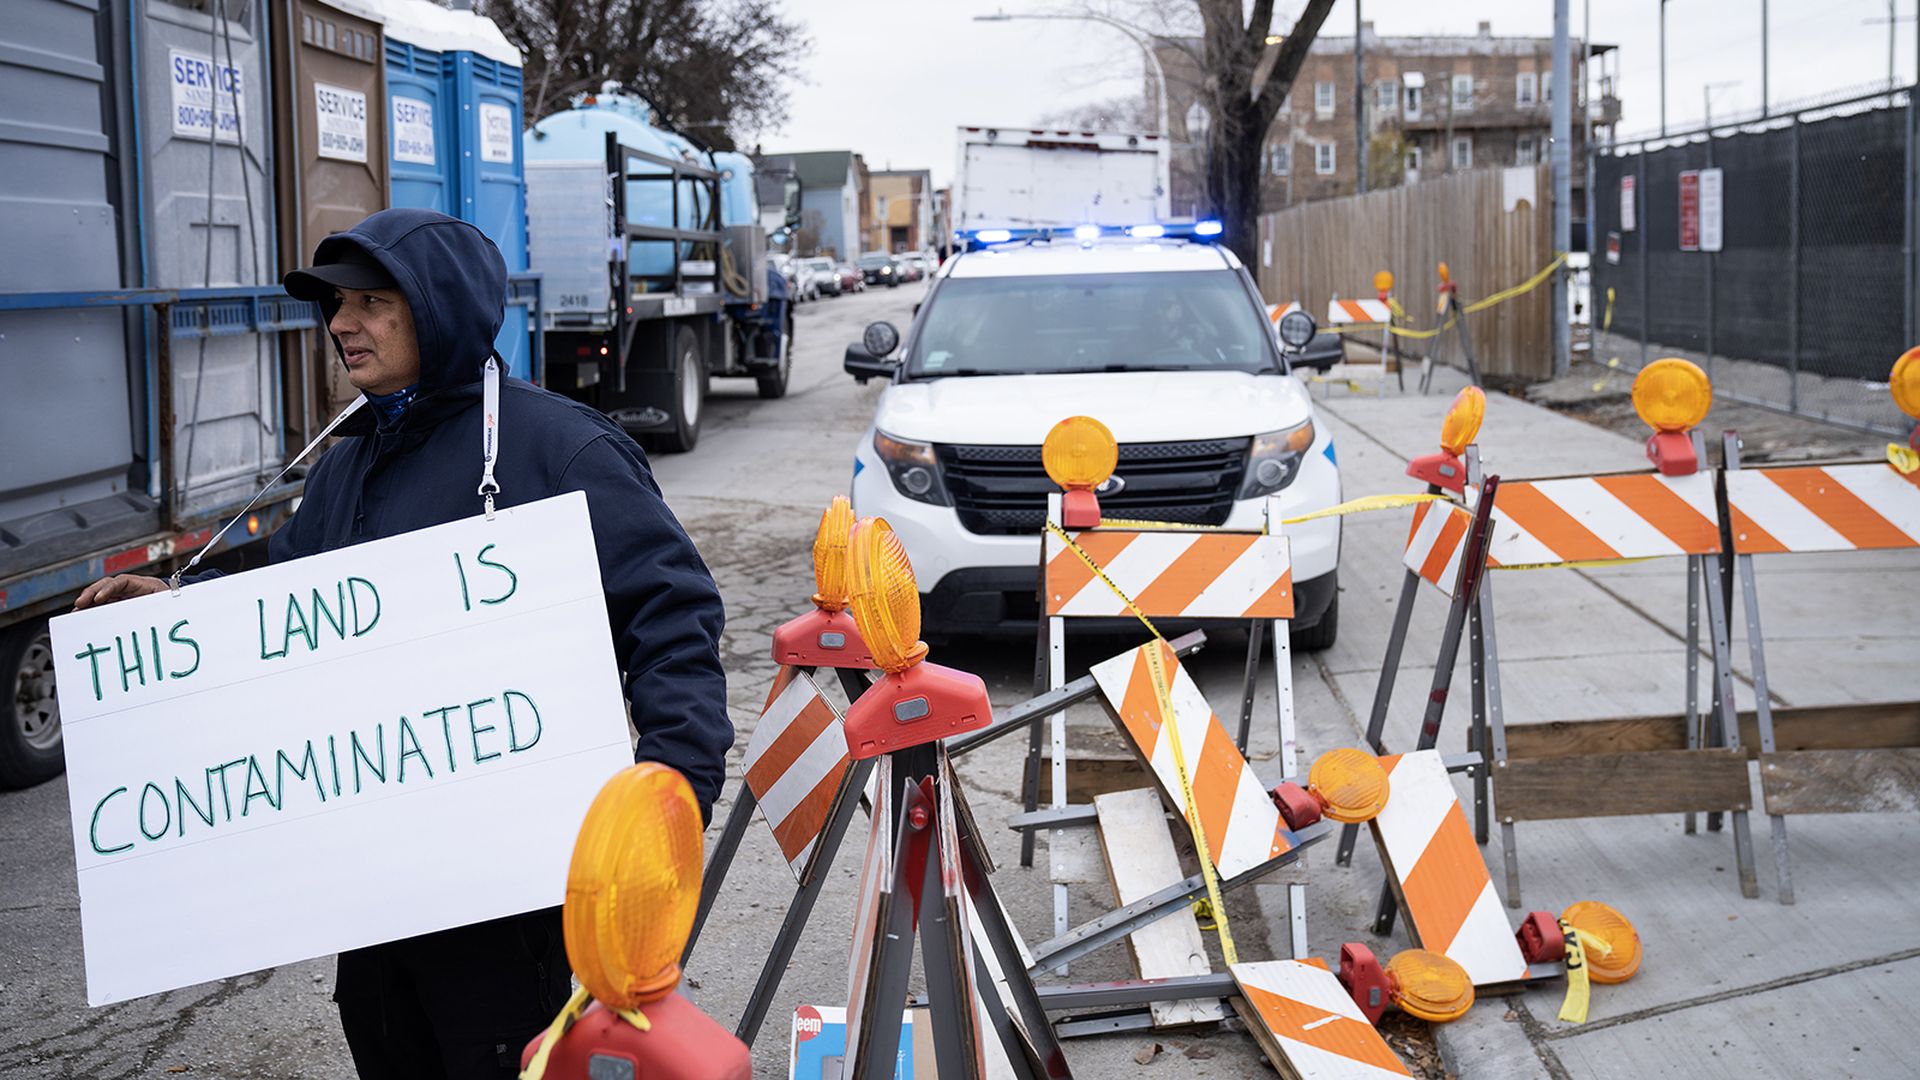 Man holding sign reading "This land is contaminated" in front of a police SUV and next to traffic blockades. 